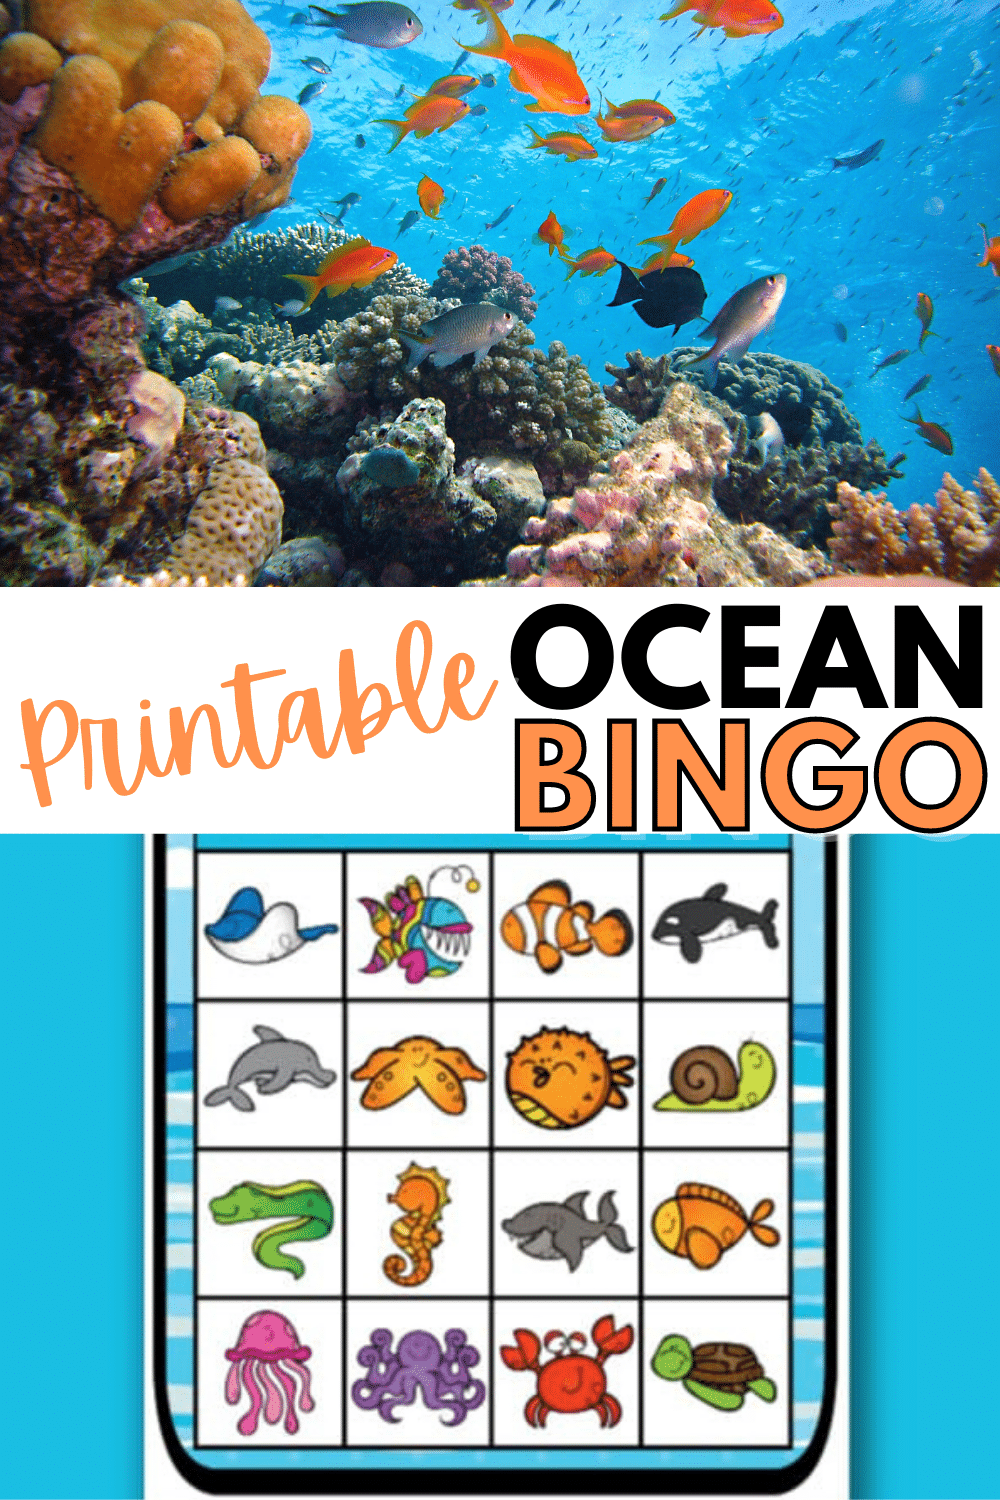 top image of fish swimming under water bottom image is printable ocean bingo on a blue background